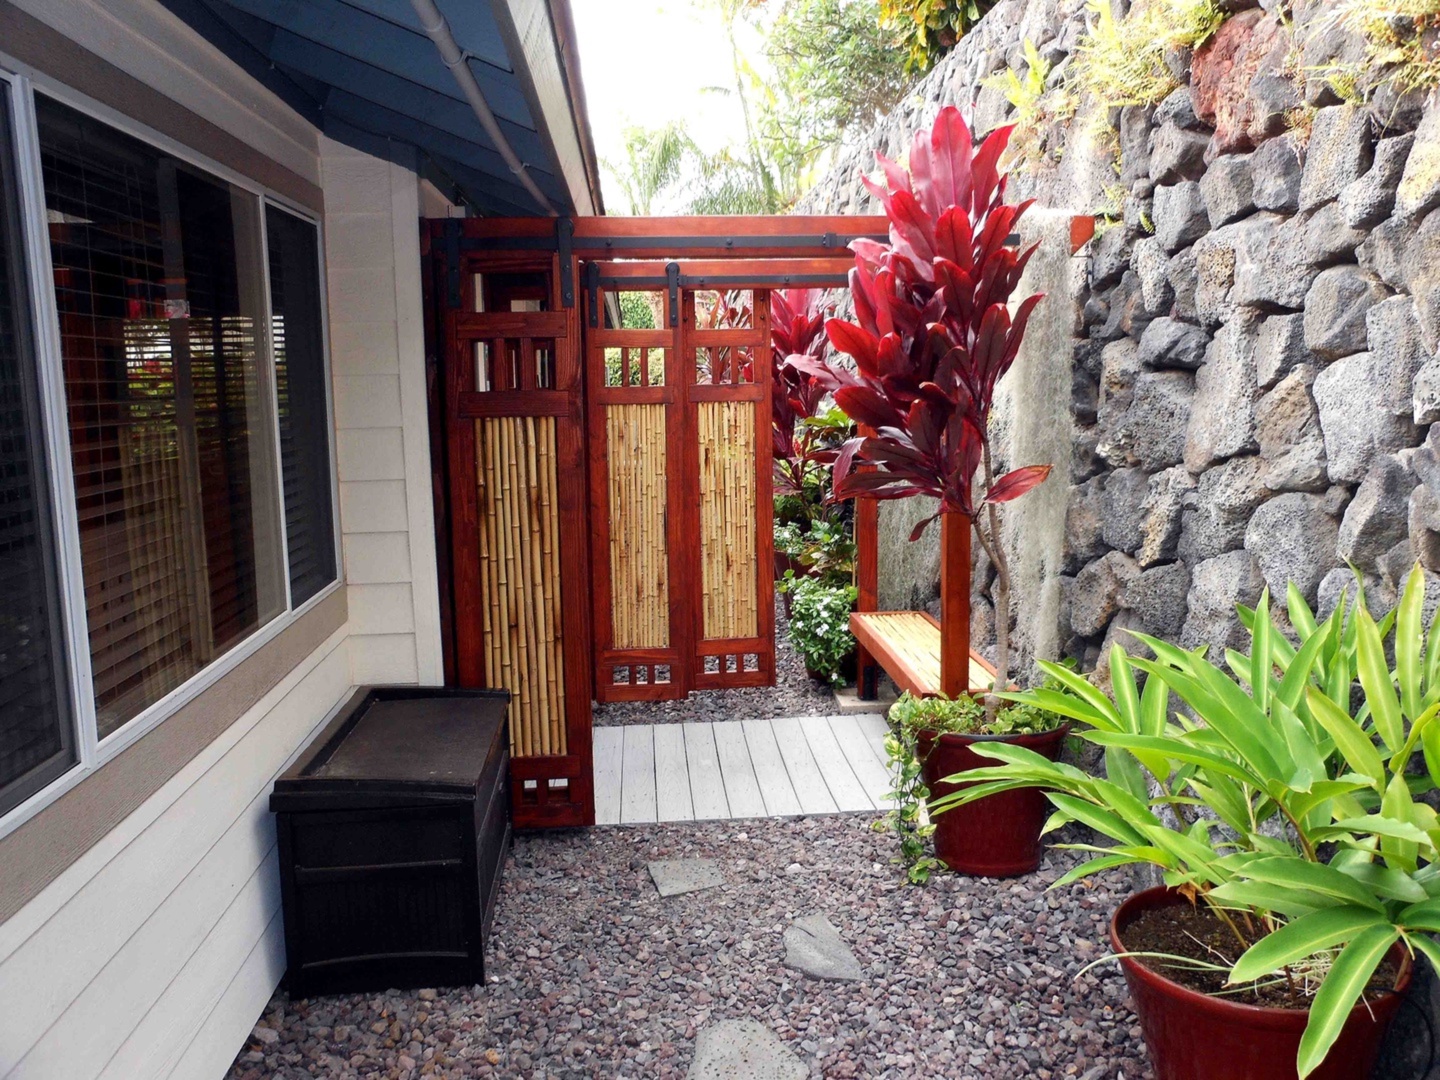 Kailua Kona Vacation Rentals, Hale Alaula - Ocean View - Rinse off under the stars with a private outdoor shower.